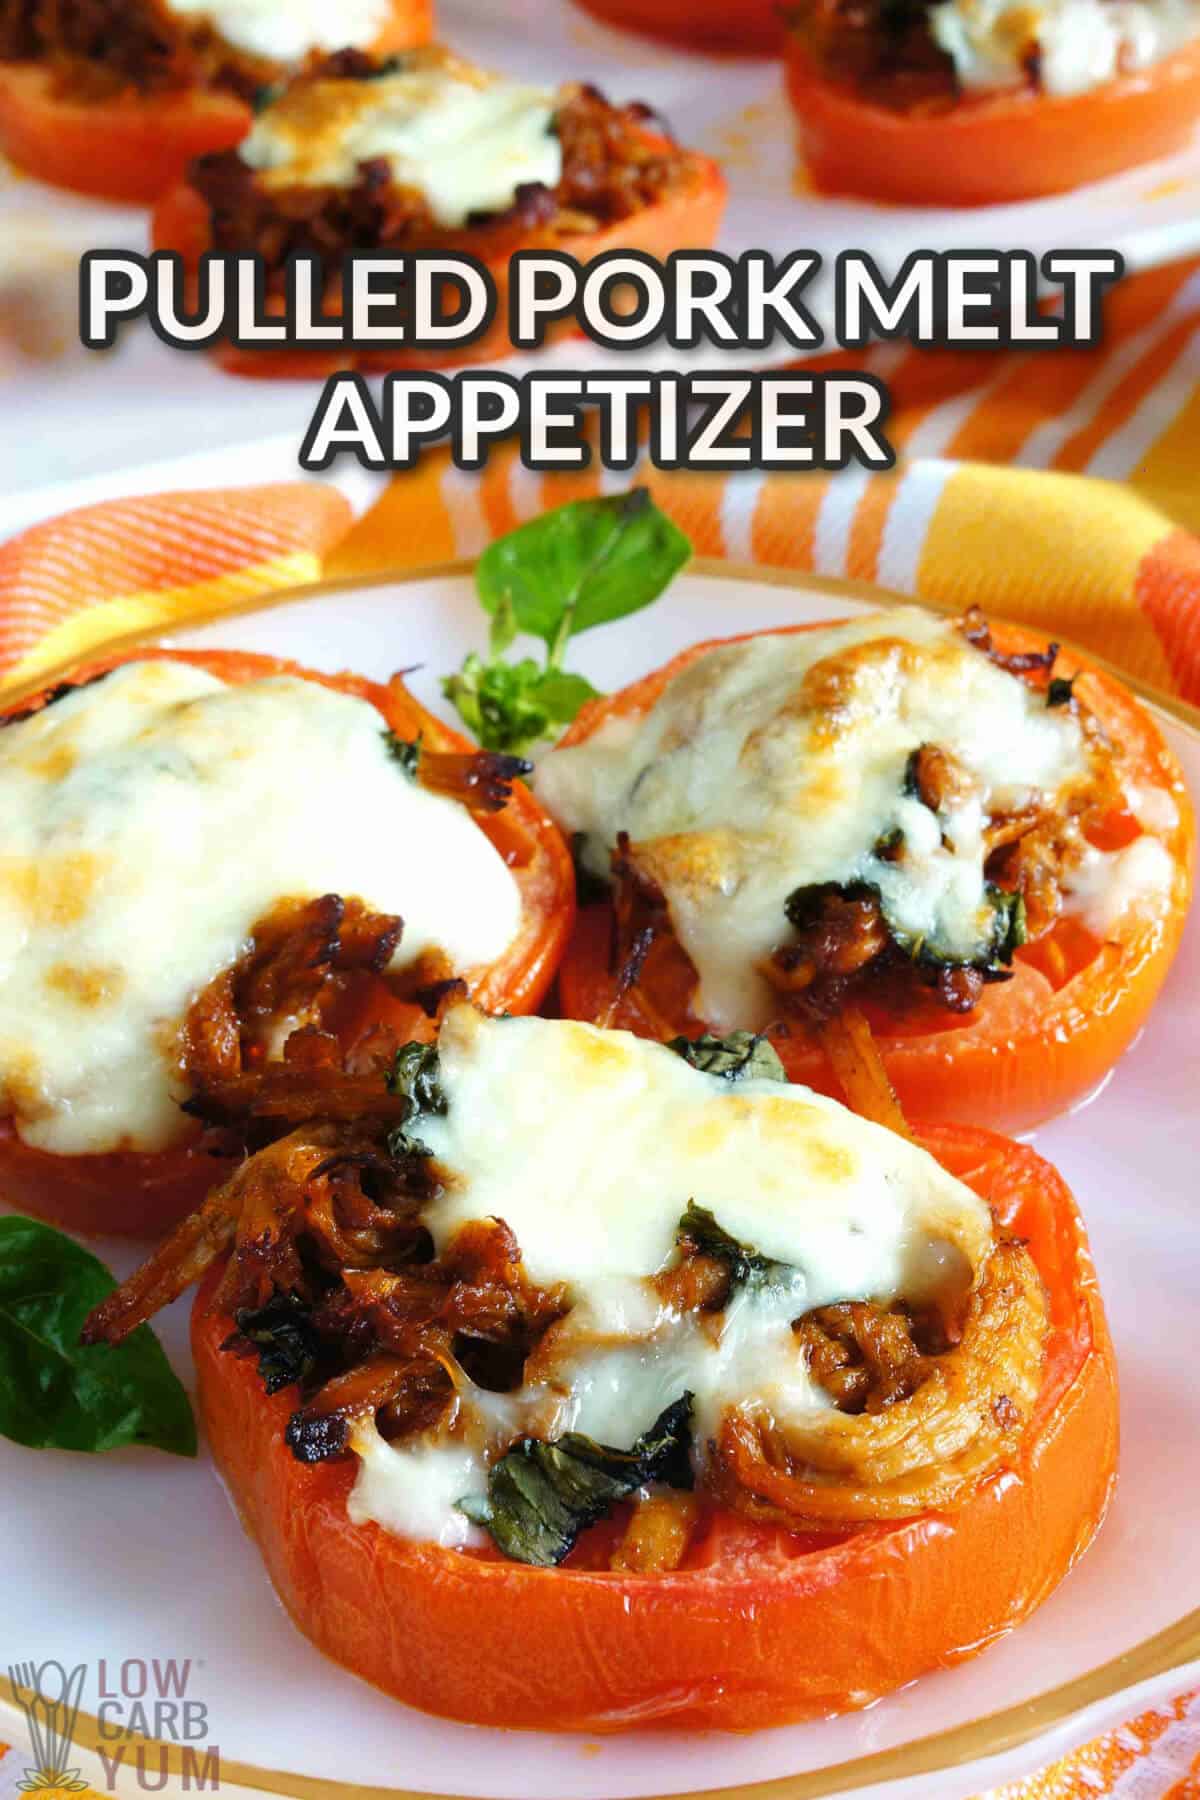 pulled pork melt appetizer recipe image with text overlay